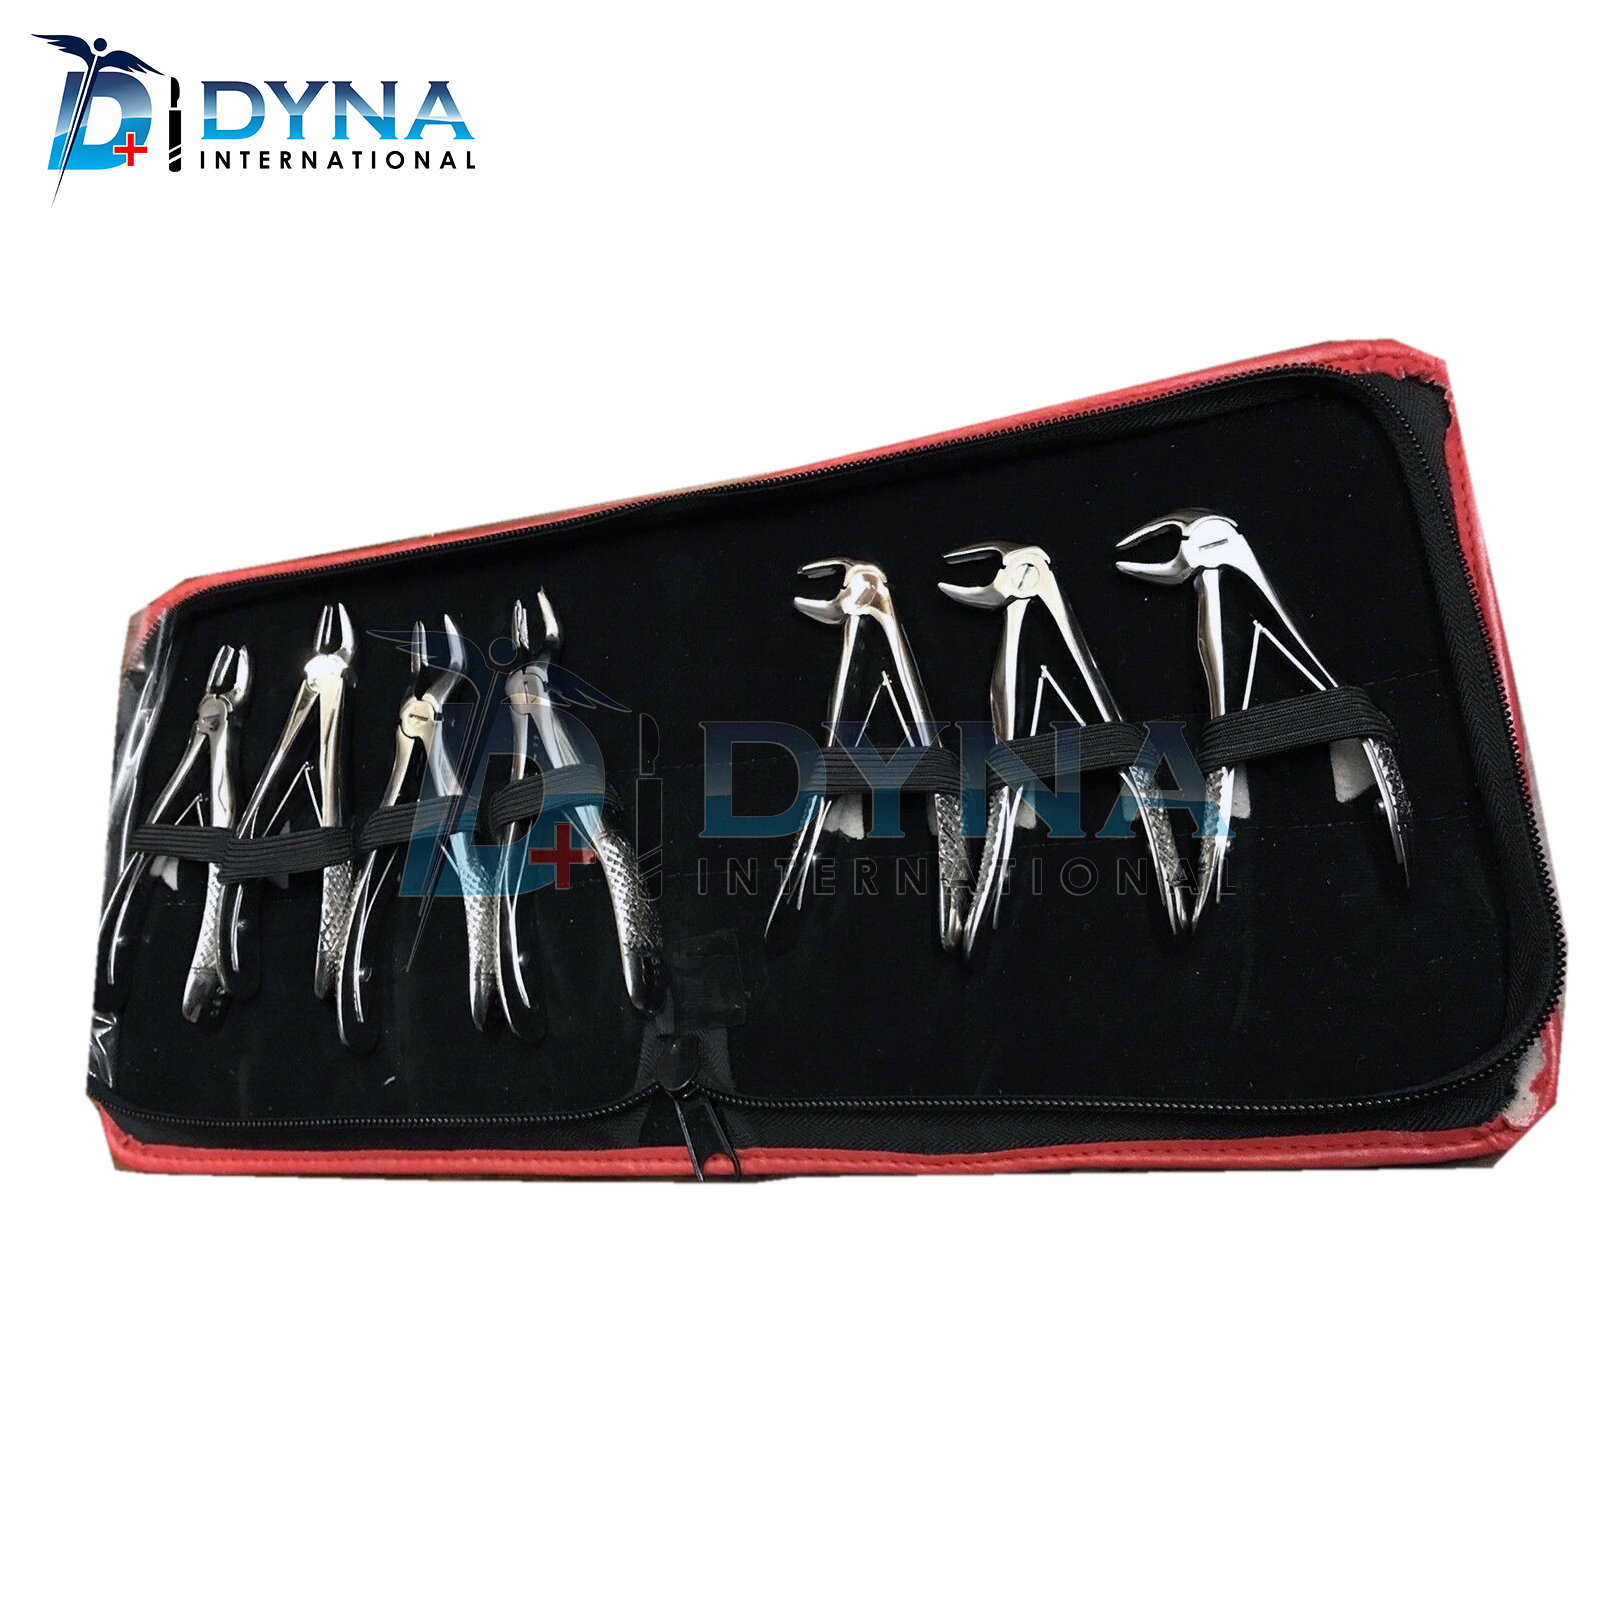 Pedo-Children-Dental-Extracting-Forceps-Kit-7-Pcs-With-Pouch-Dental-Instruments-54-5.jpg